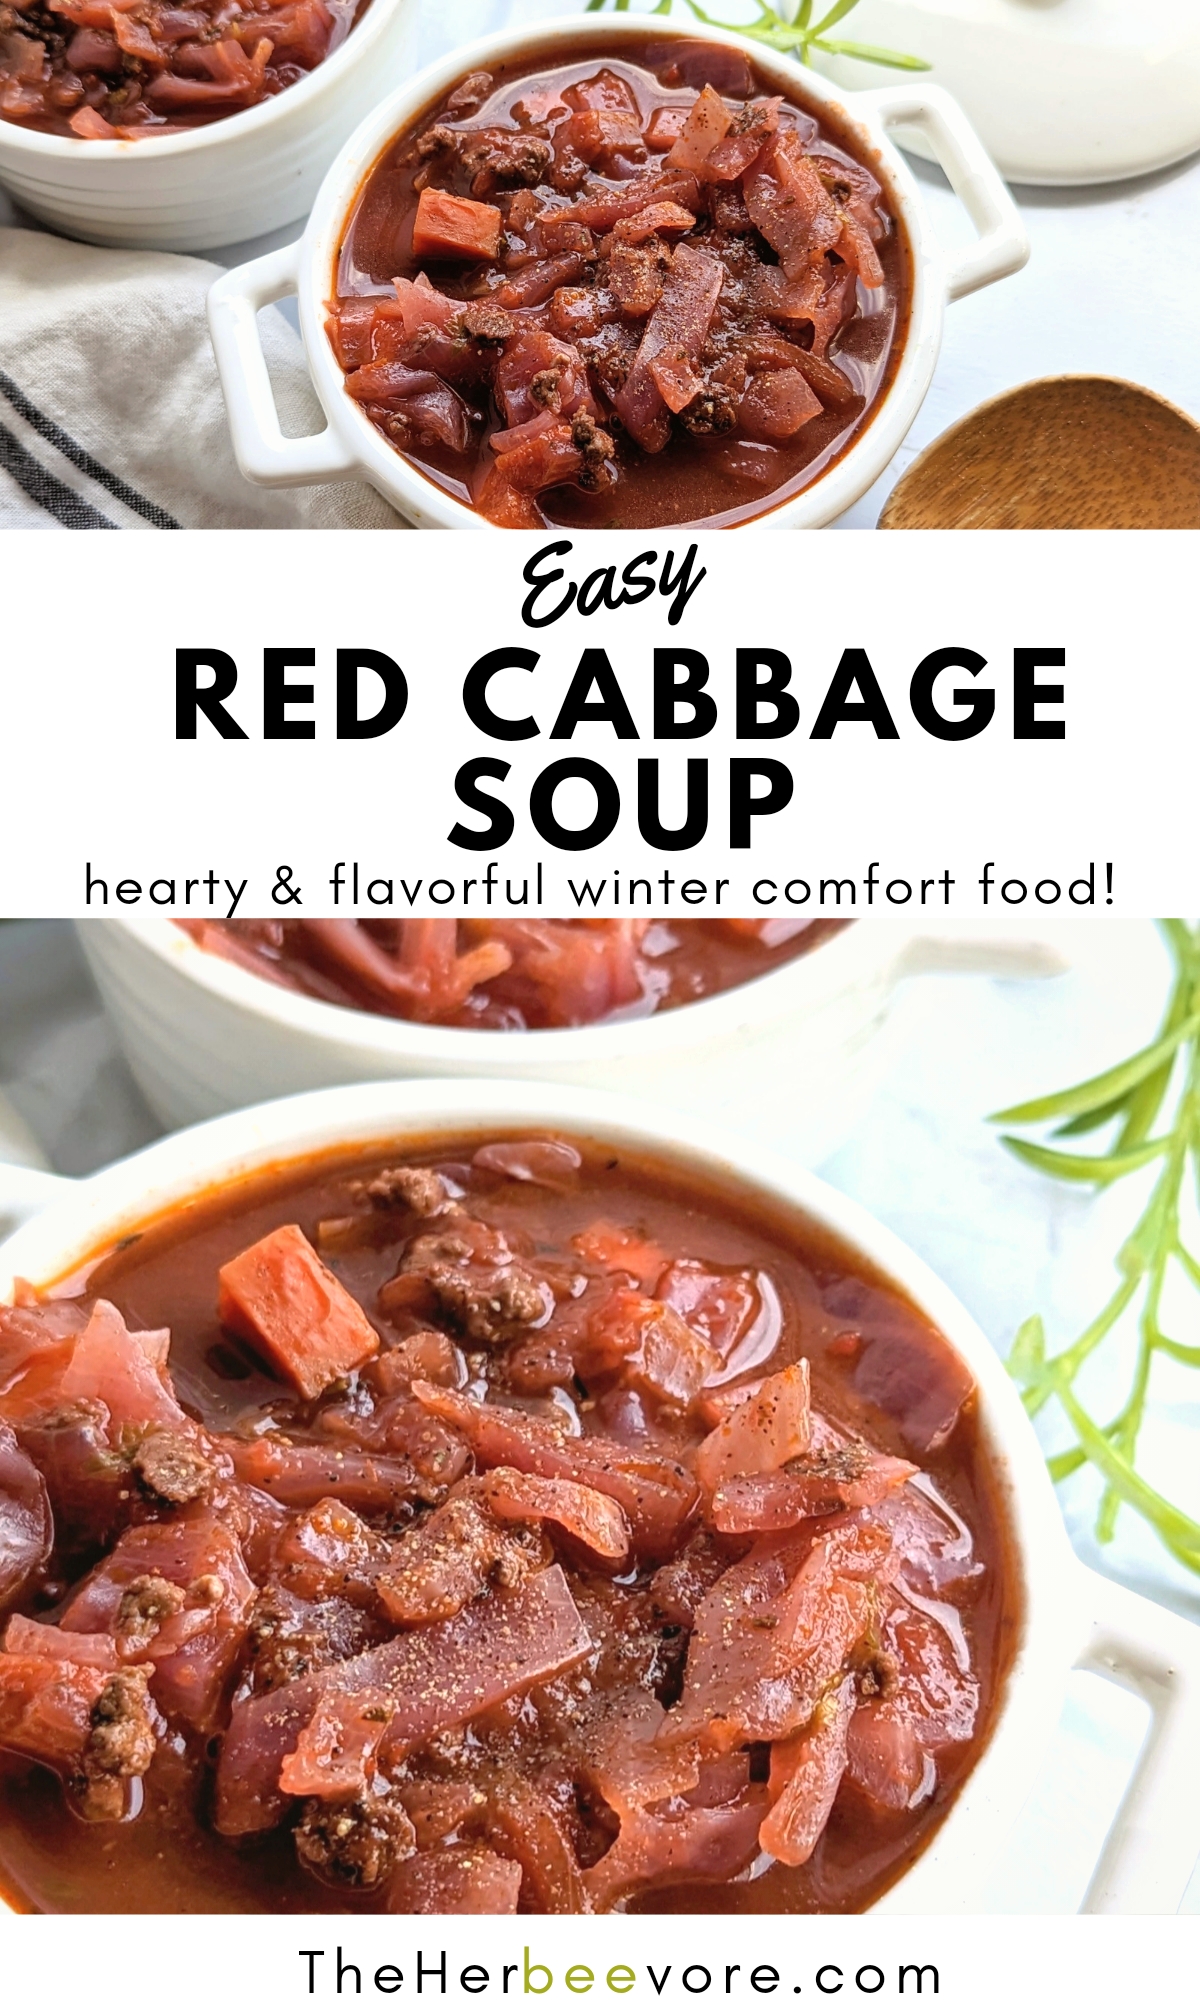 red cabbage soup recipe with ground beef cabbage soup and stew recipes with purple cabbage tomato soup